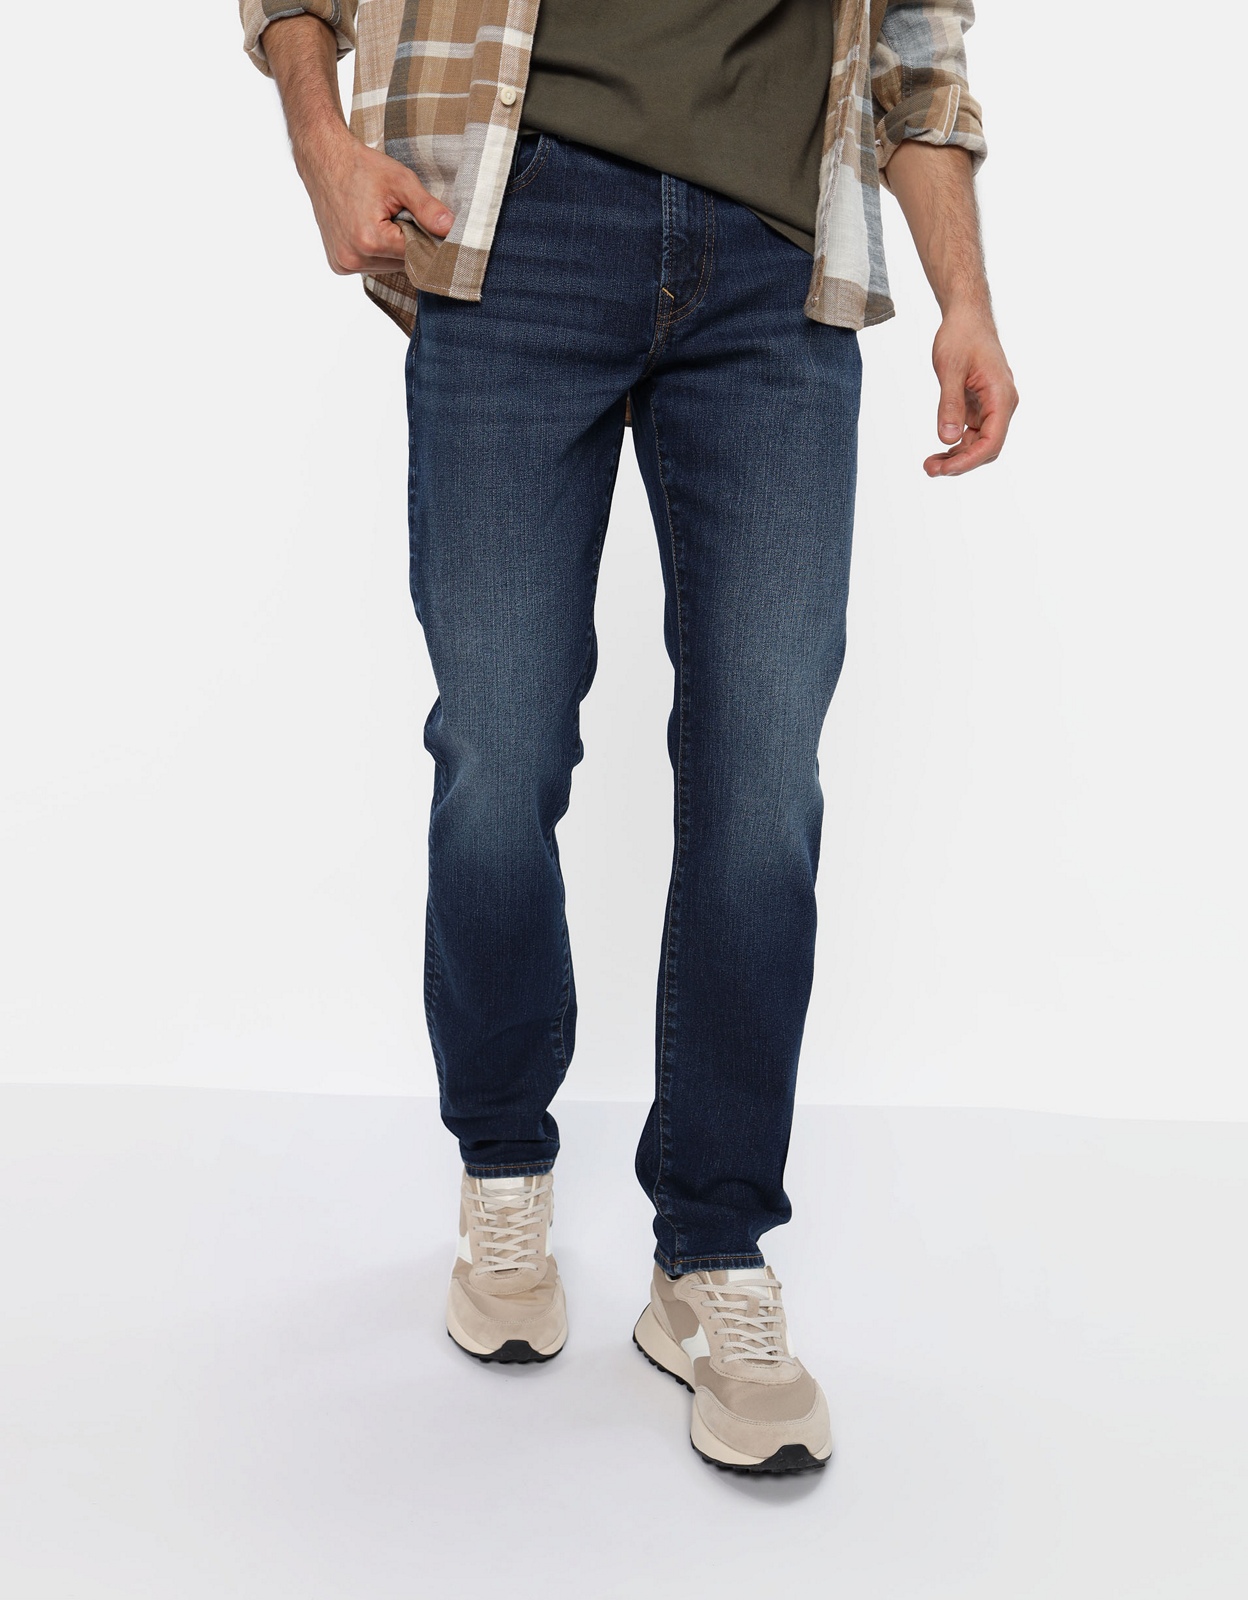 Shop AirFlex+ Slim Straight Jean online | American Eagle Outfitters Egypt